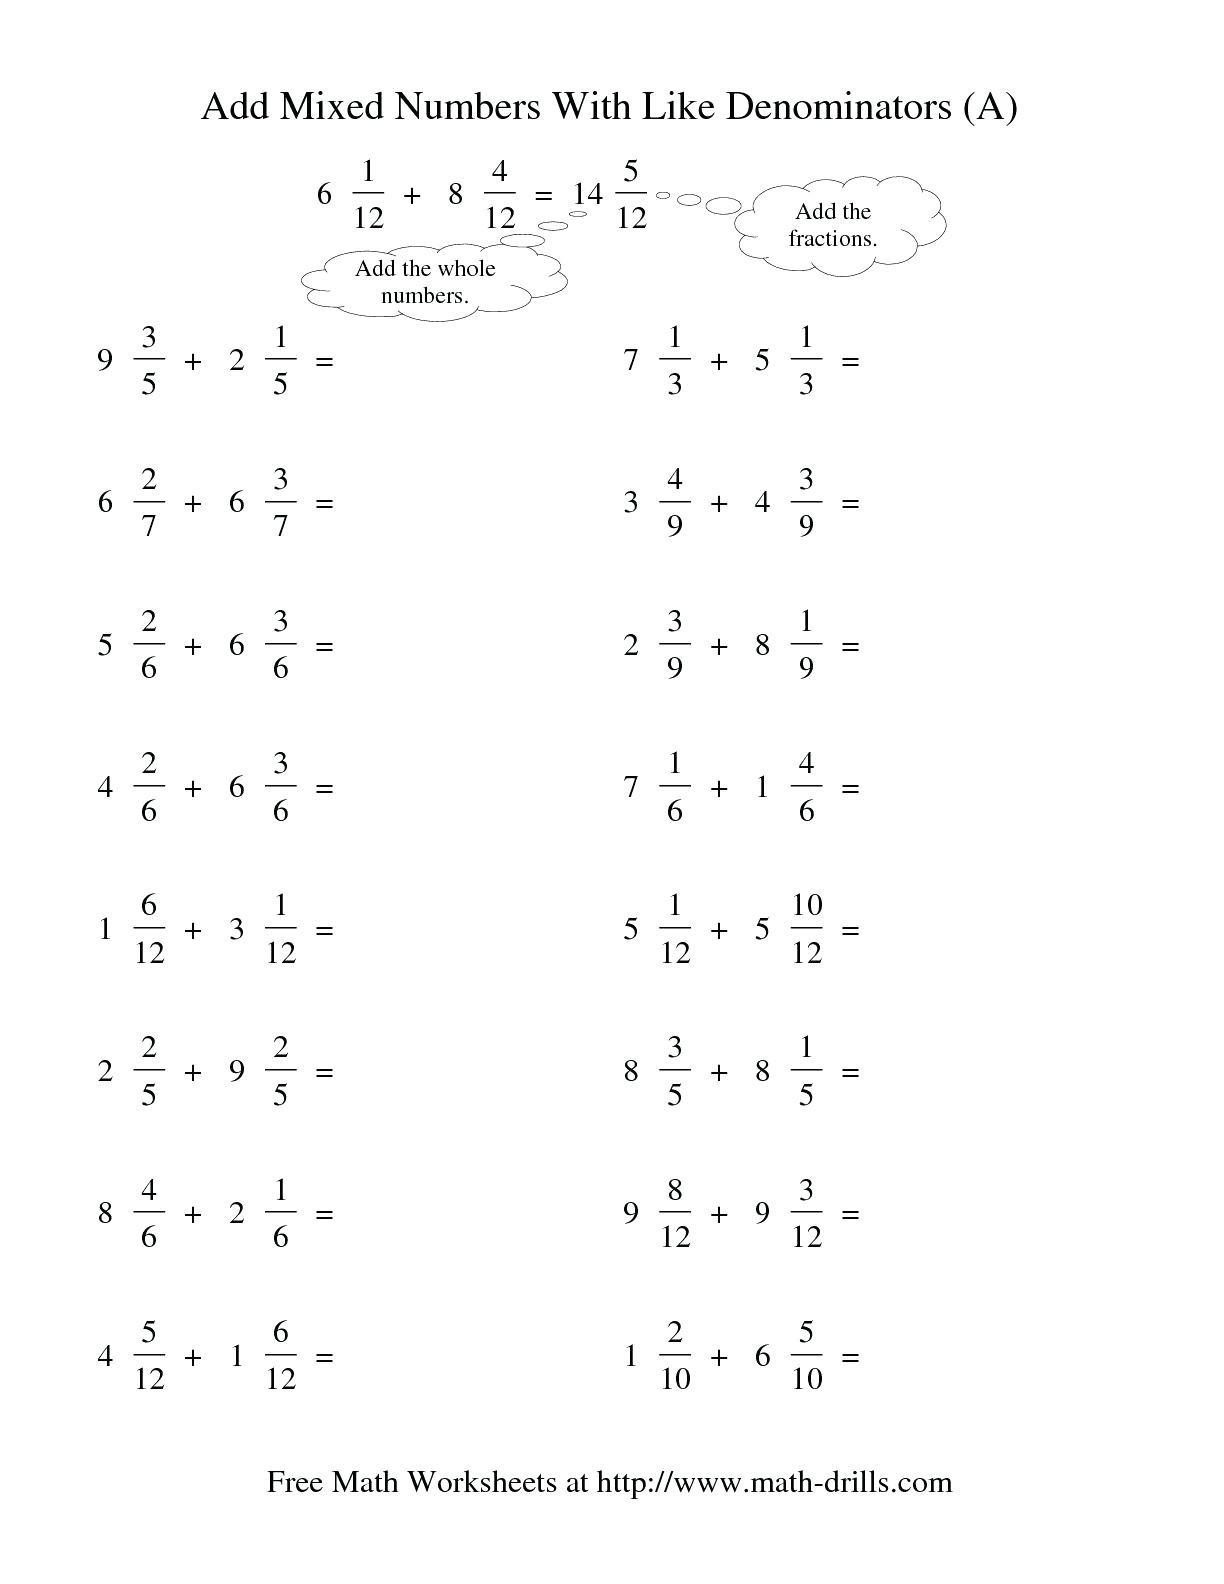 Free Math Worksheets Third Grade 3 Subtraction Subtract whole Hundreds